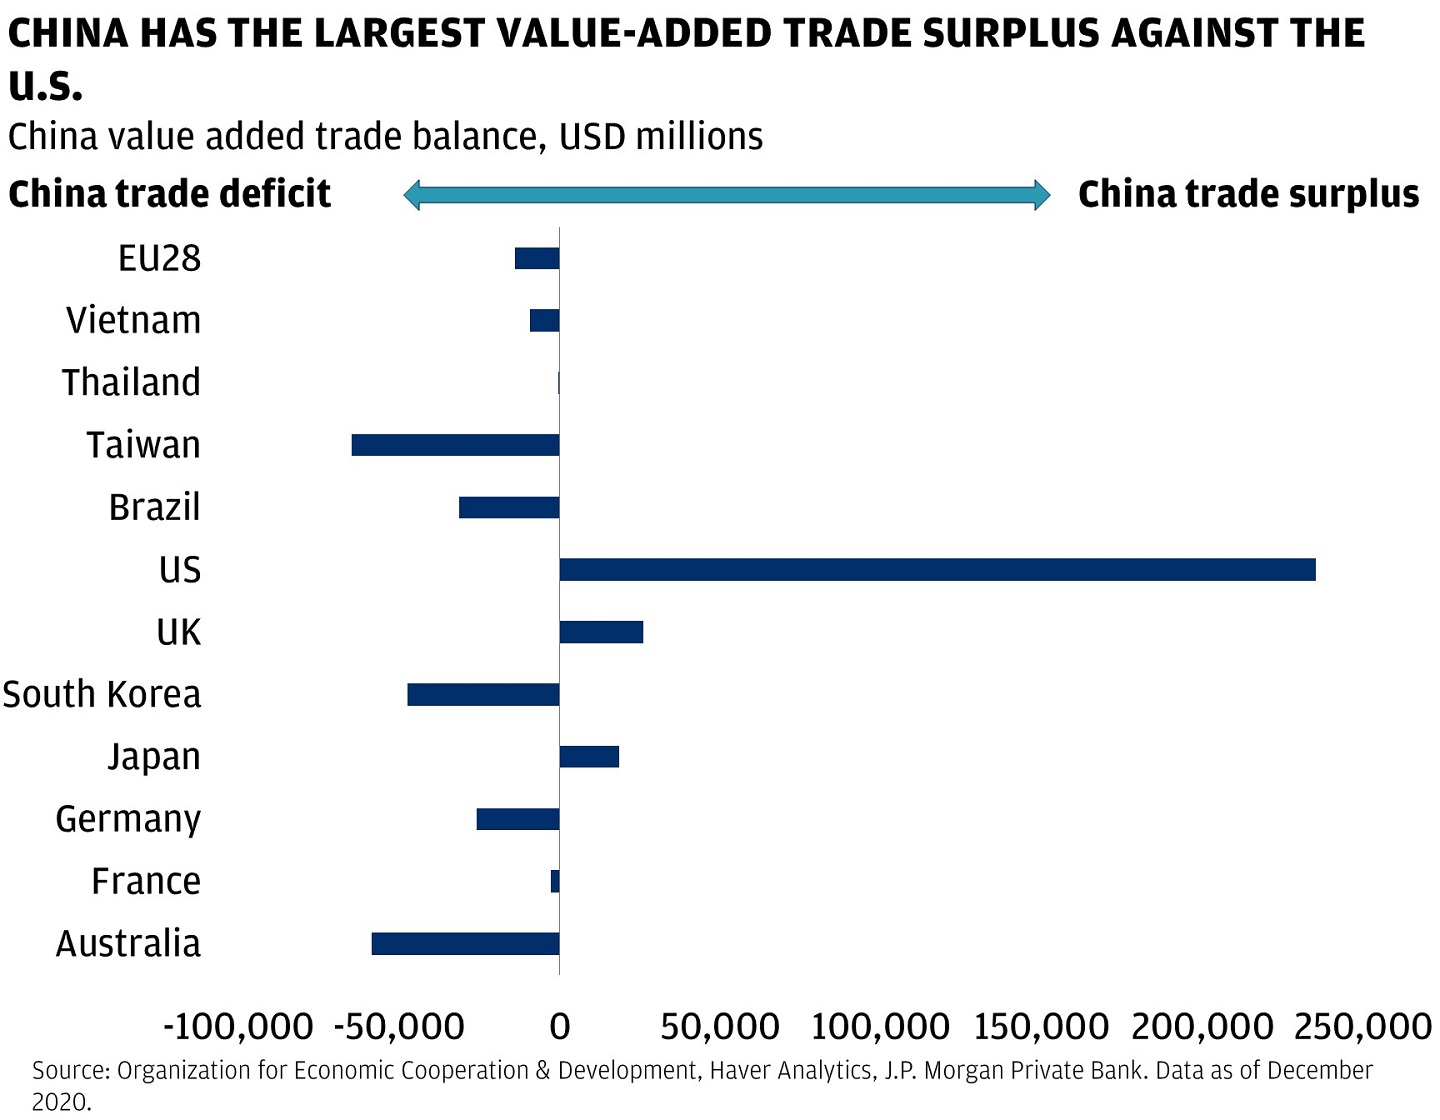 This bar graph shows China’s value-added trade balance, in USD millions with EU28, Vietnam, Thailand, Taiwan, Brazil, U.S., U.K., South Korea, Japan, Germany, France and Australia in 2020.